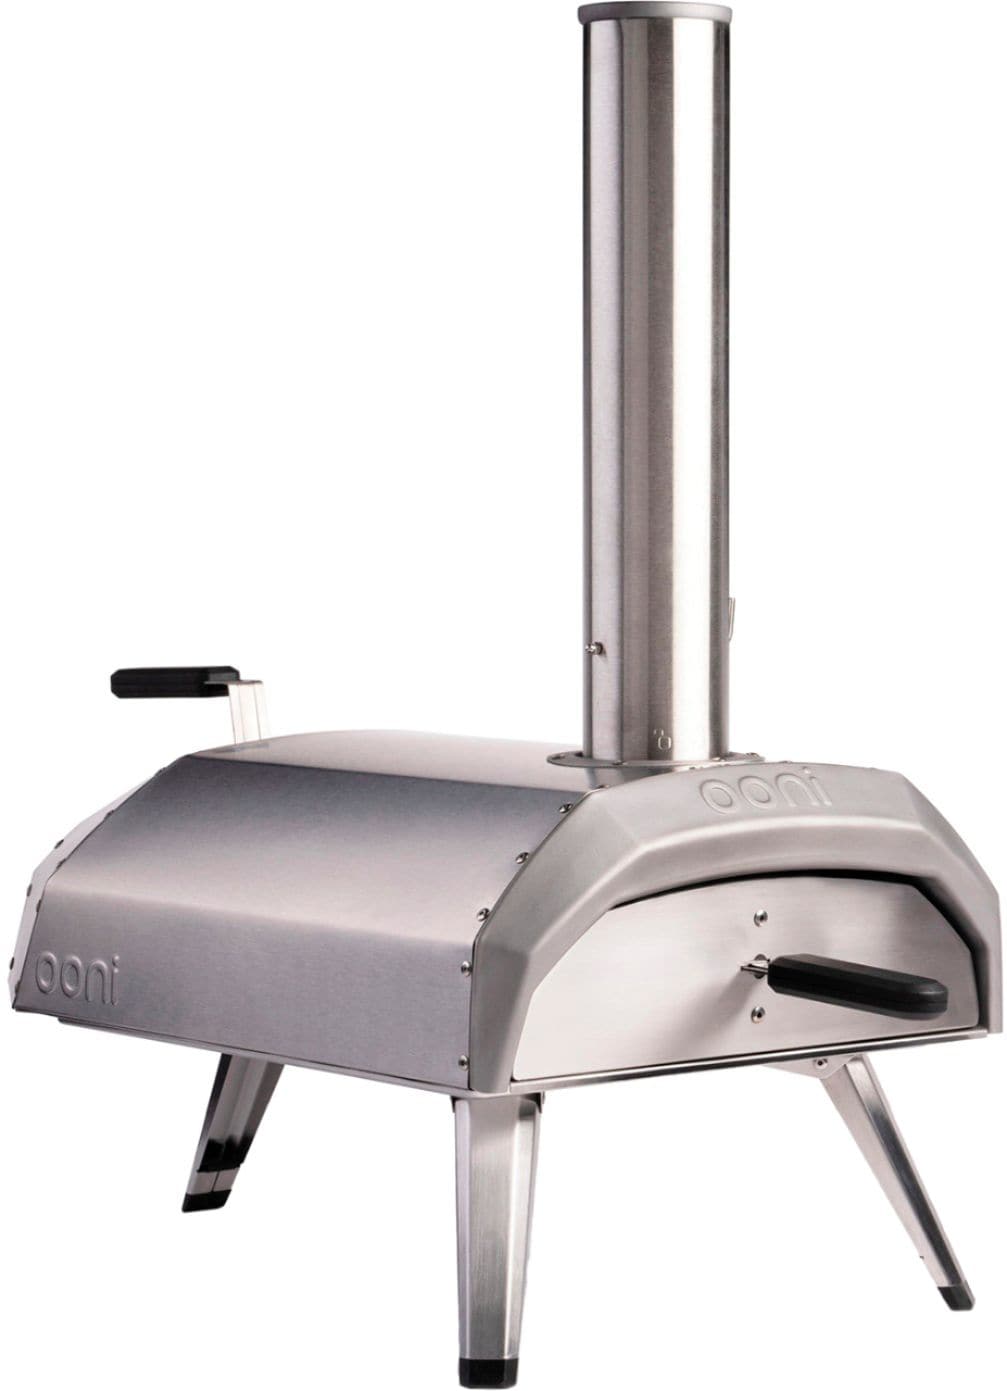 Ooni - Karu 12 Inch Portable Pizza Oven - Silver_9